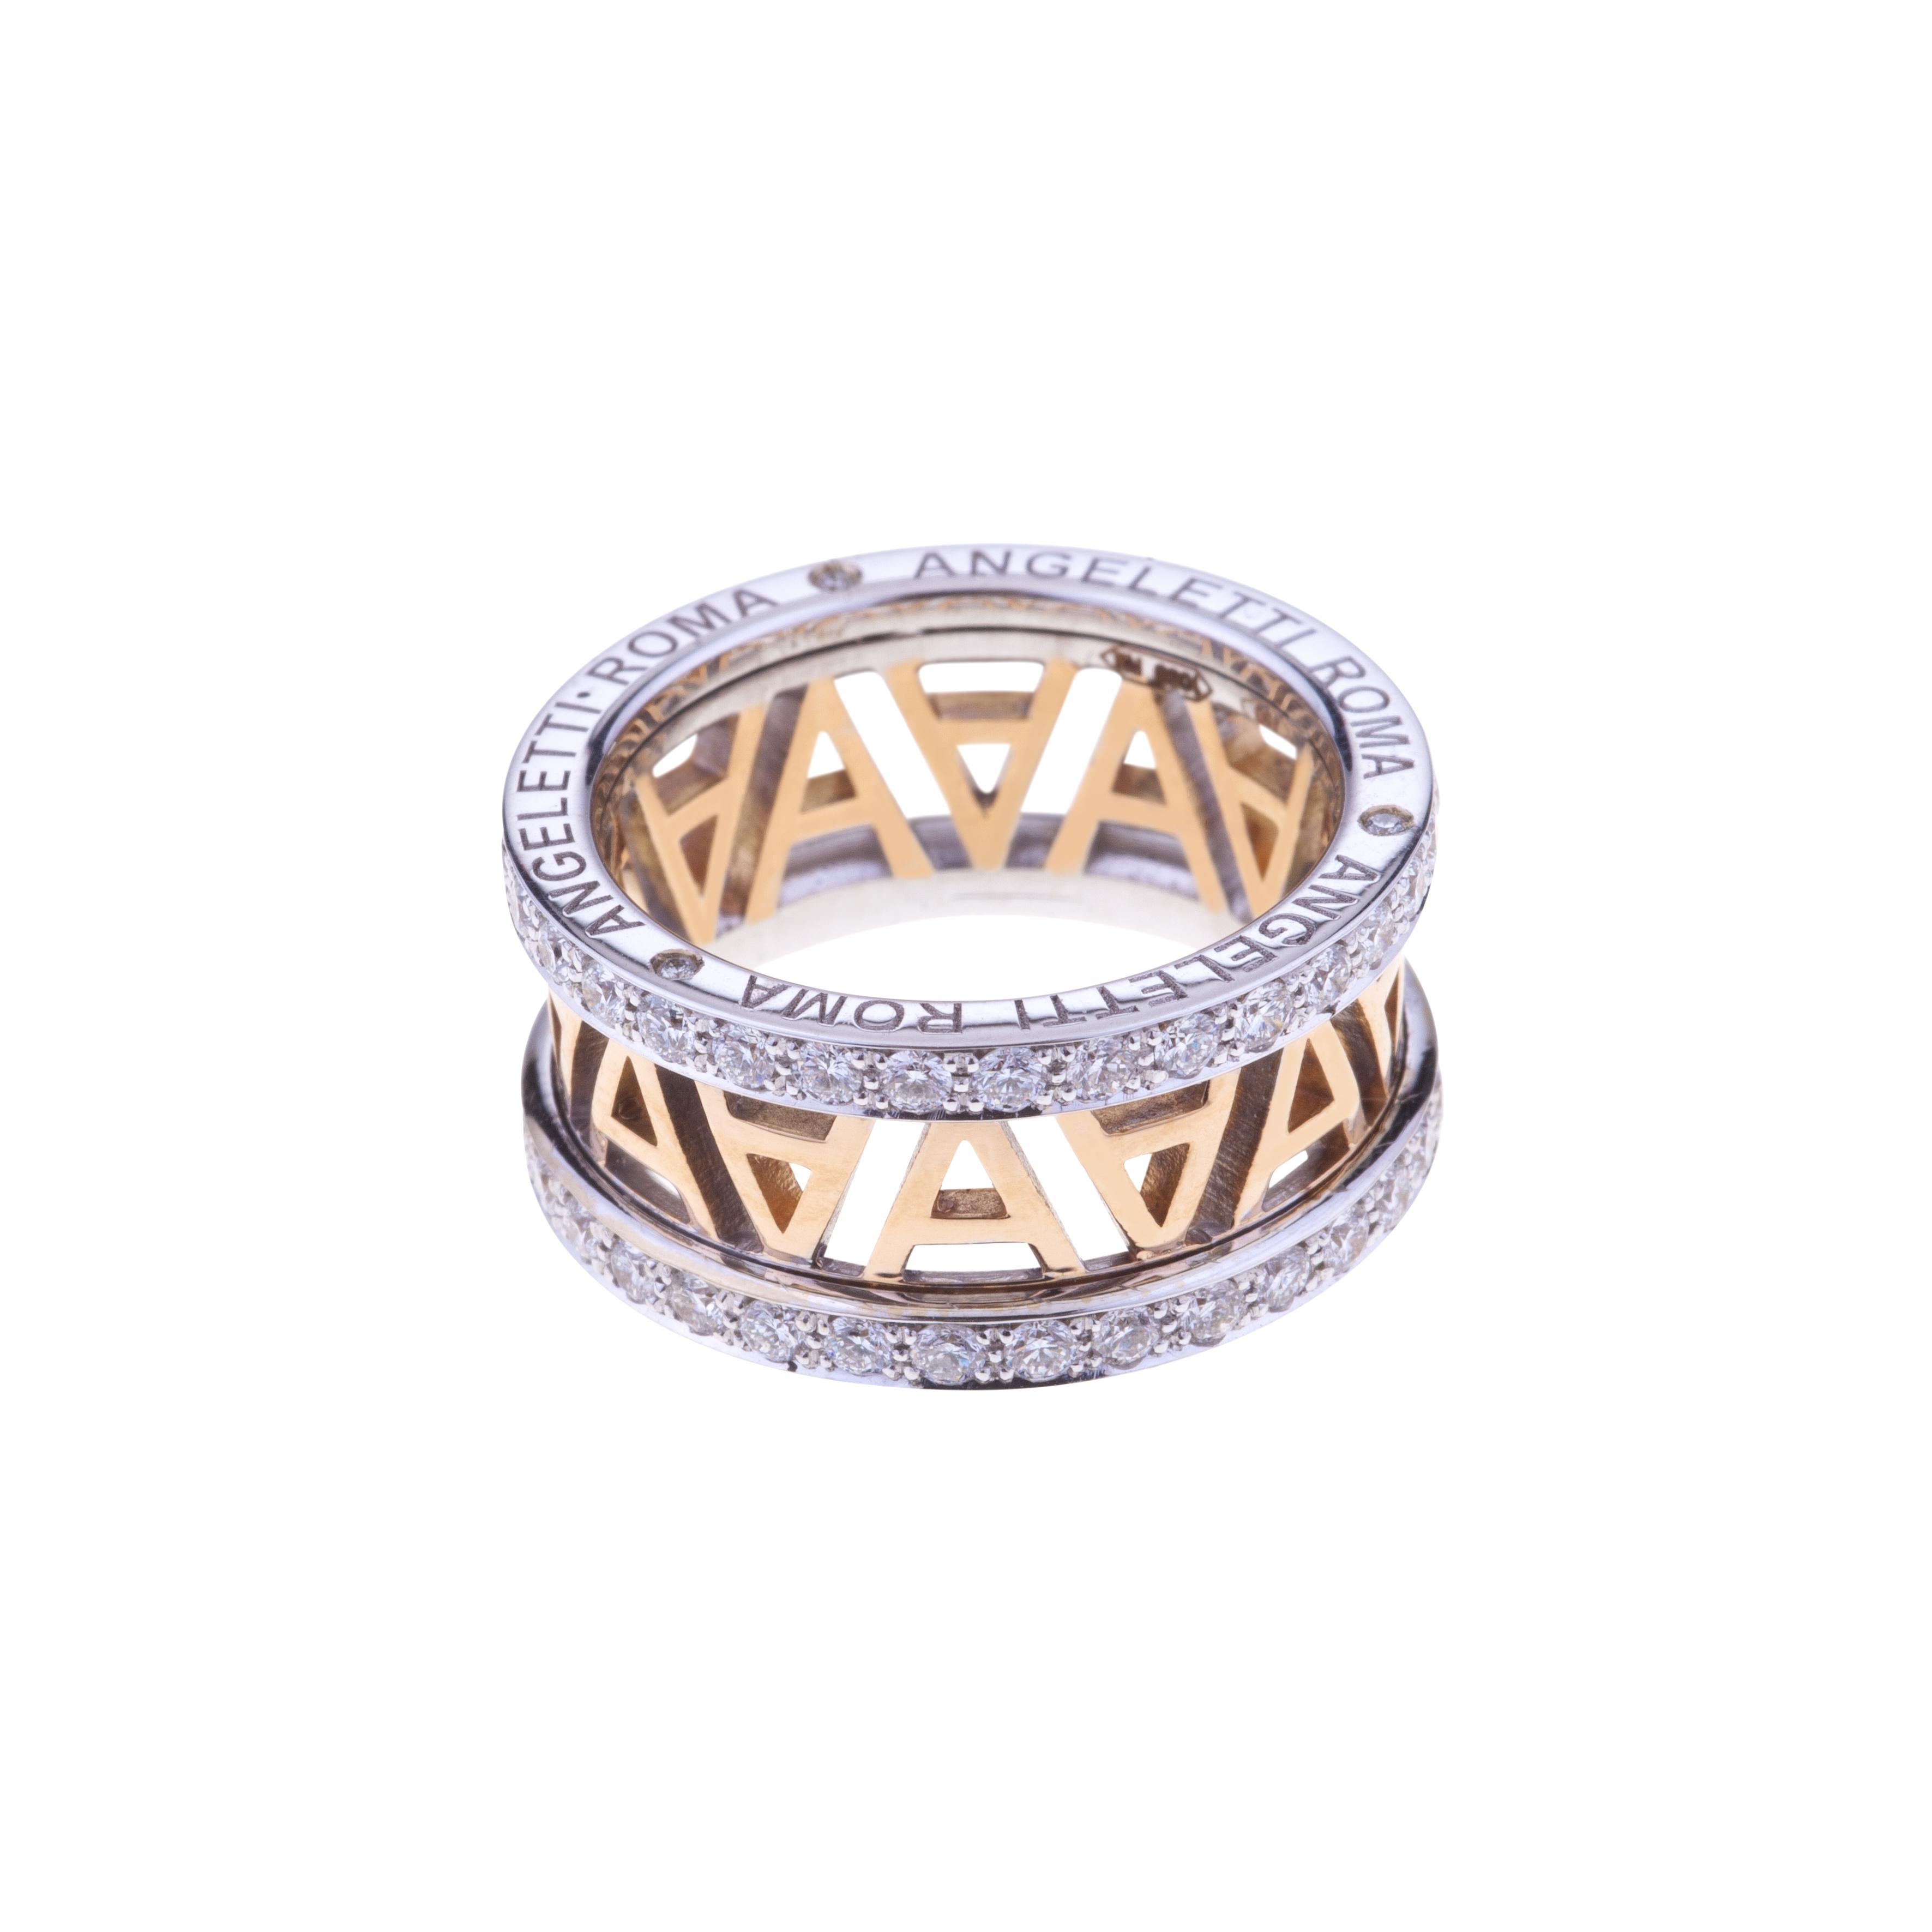 Logo by Angeletti Rose Gold Ring Large size with Diamonds
The Logo Collection is inspired by the 